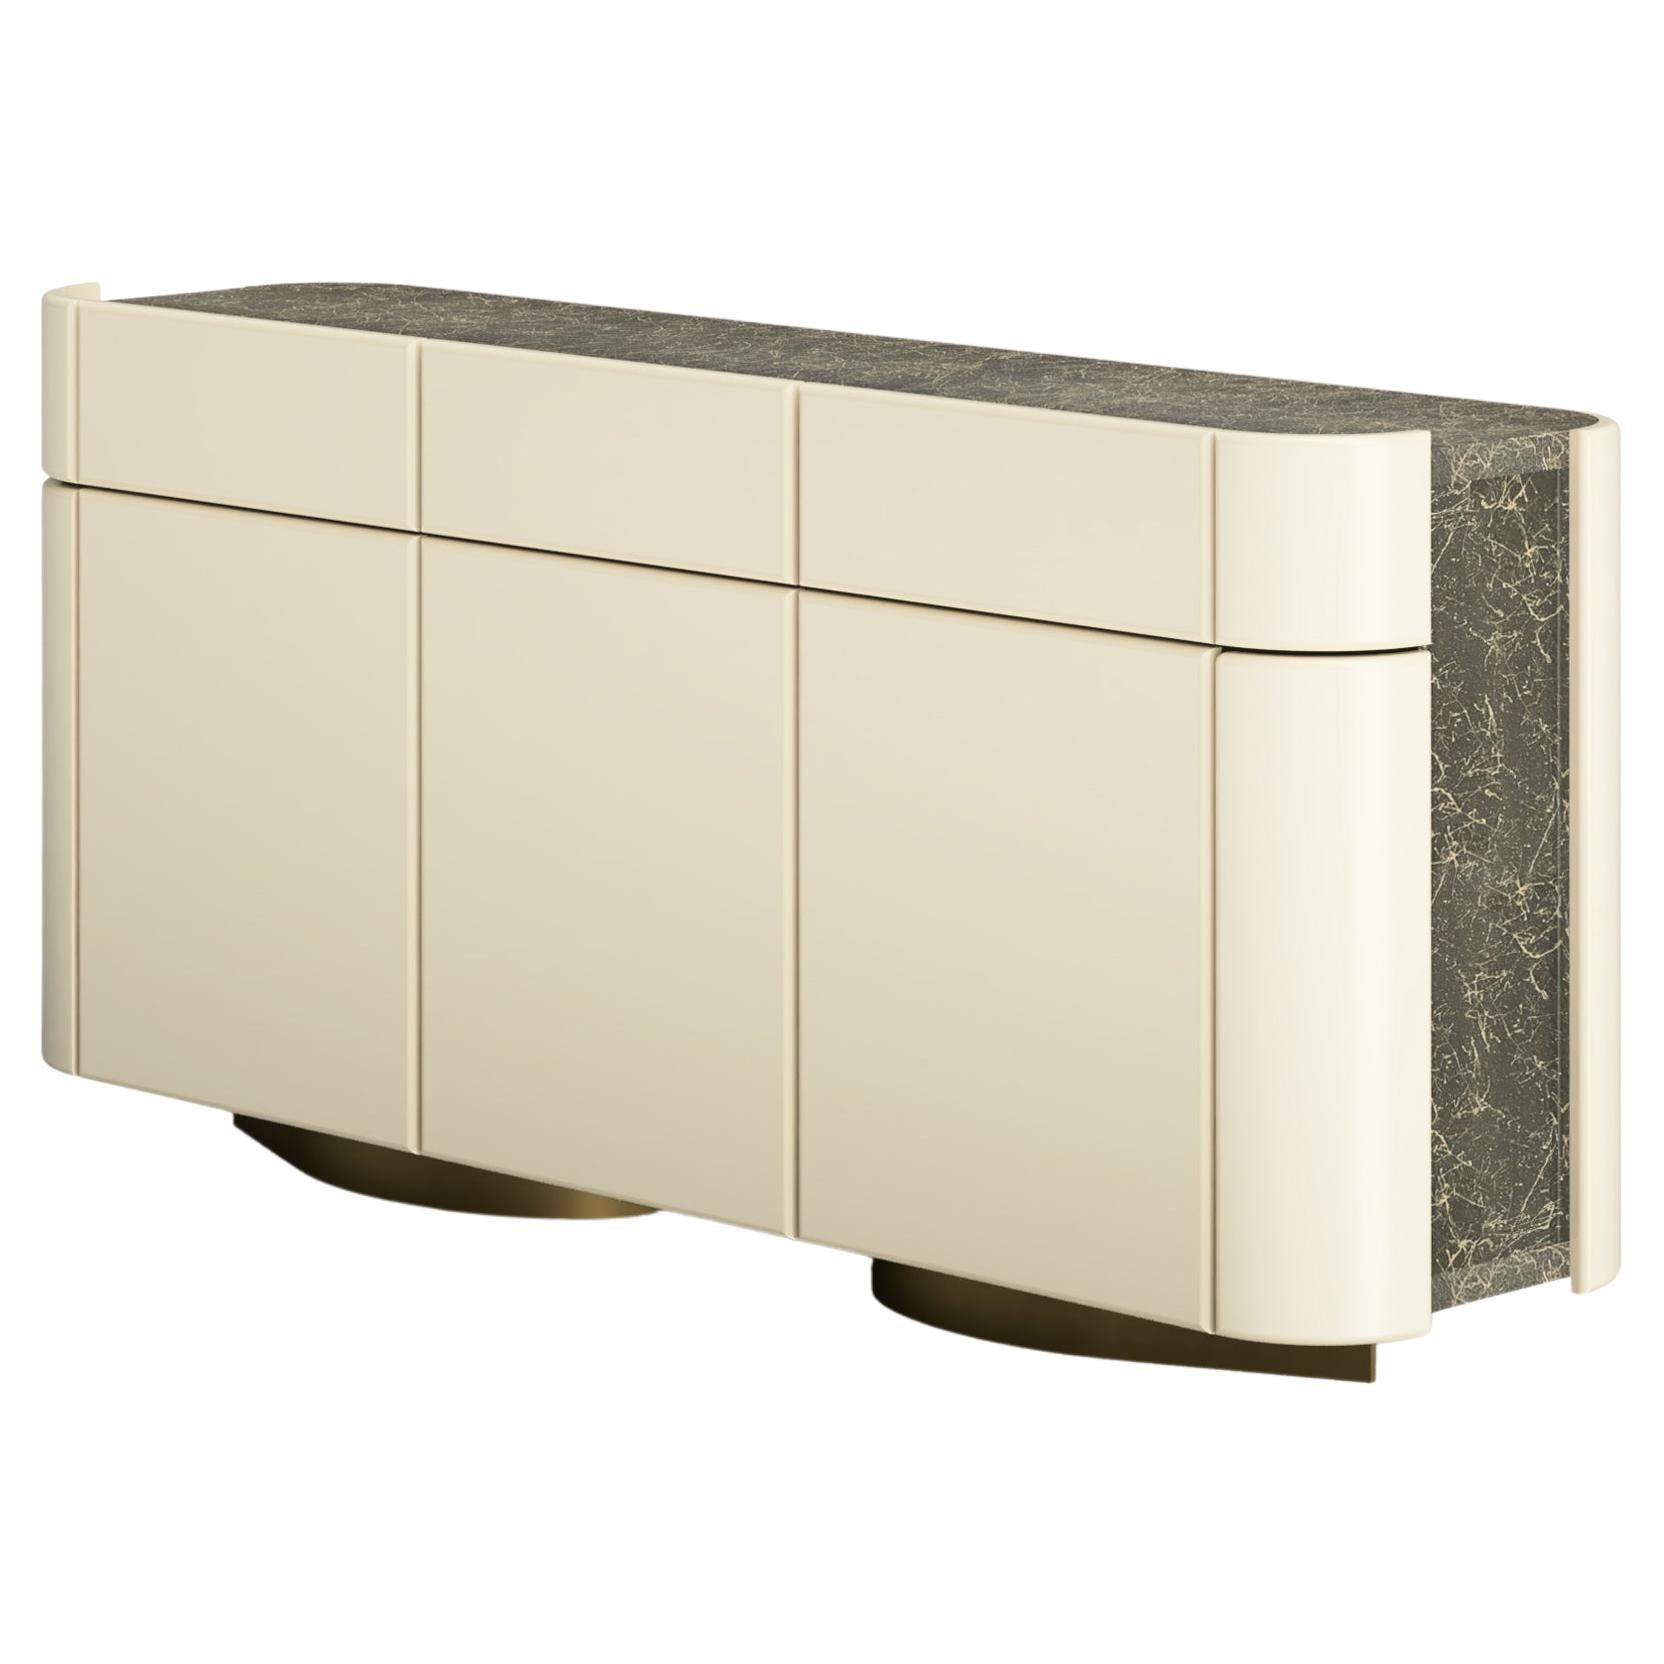 Credenza, Shiny Lacquered Wood With Textured Finish Details, Pearl Color